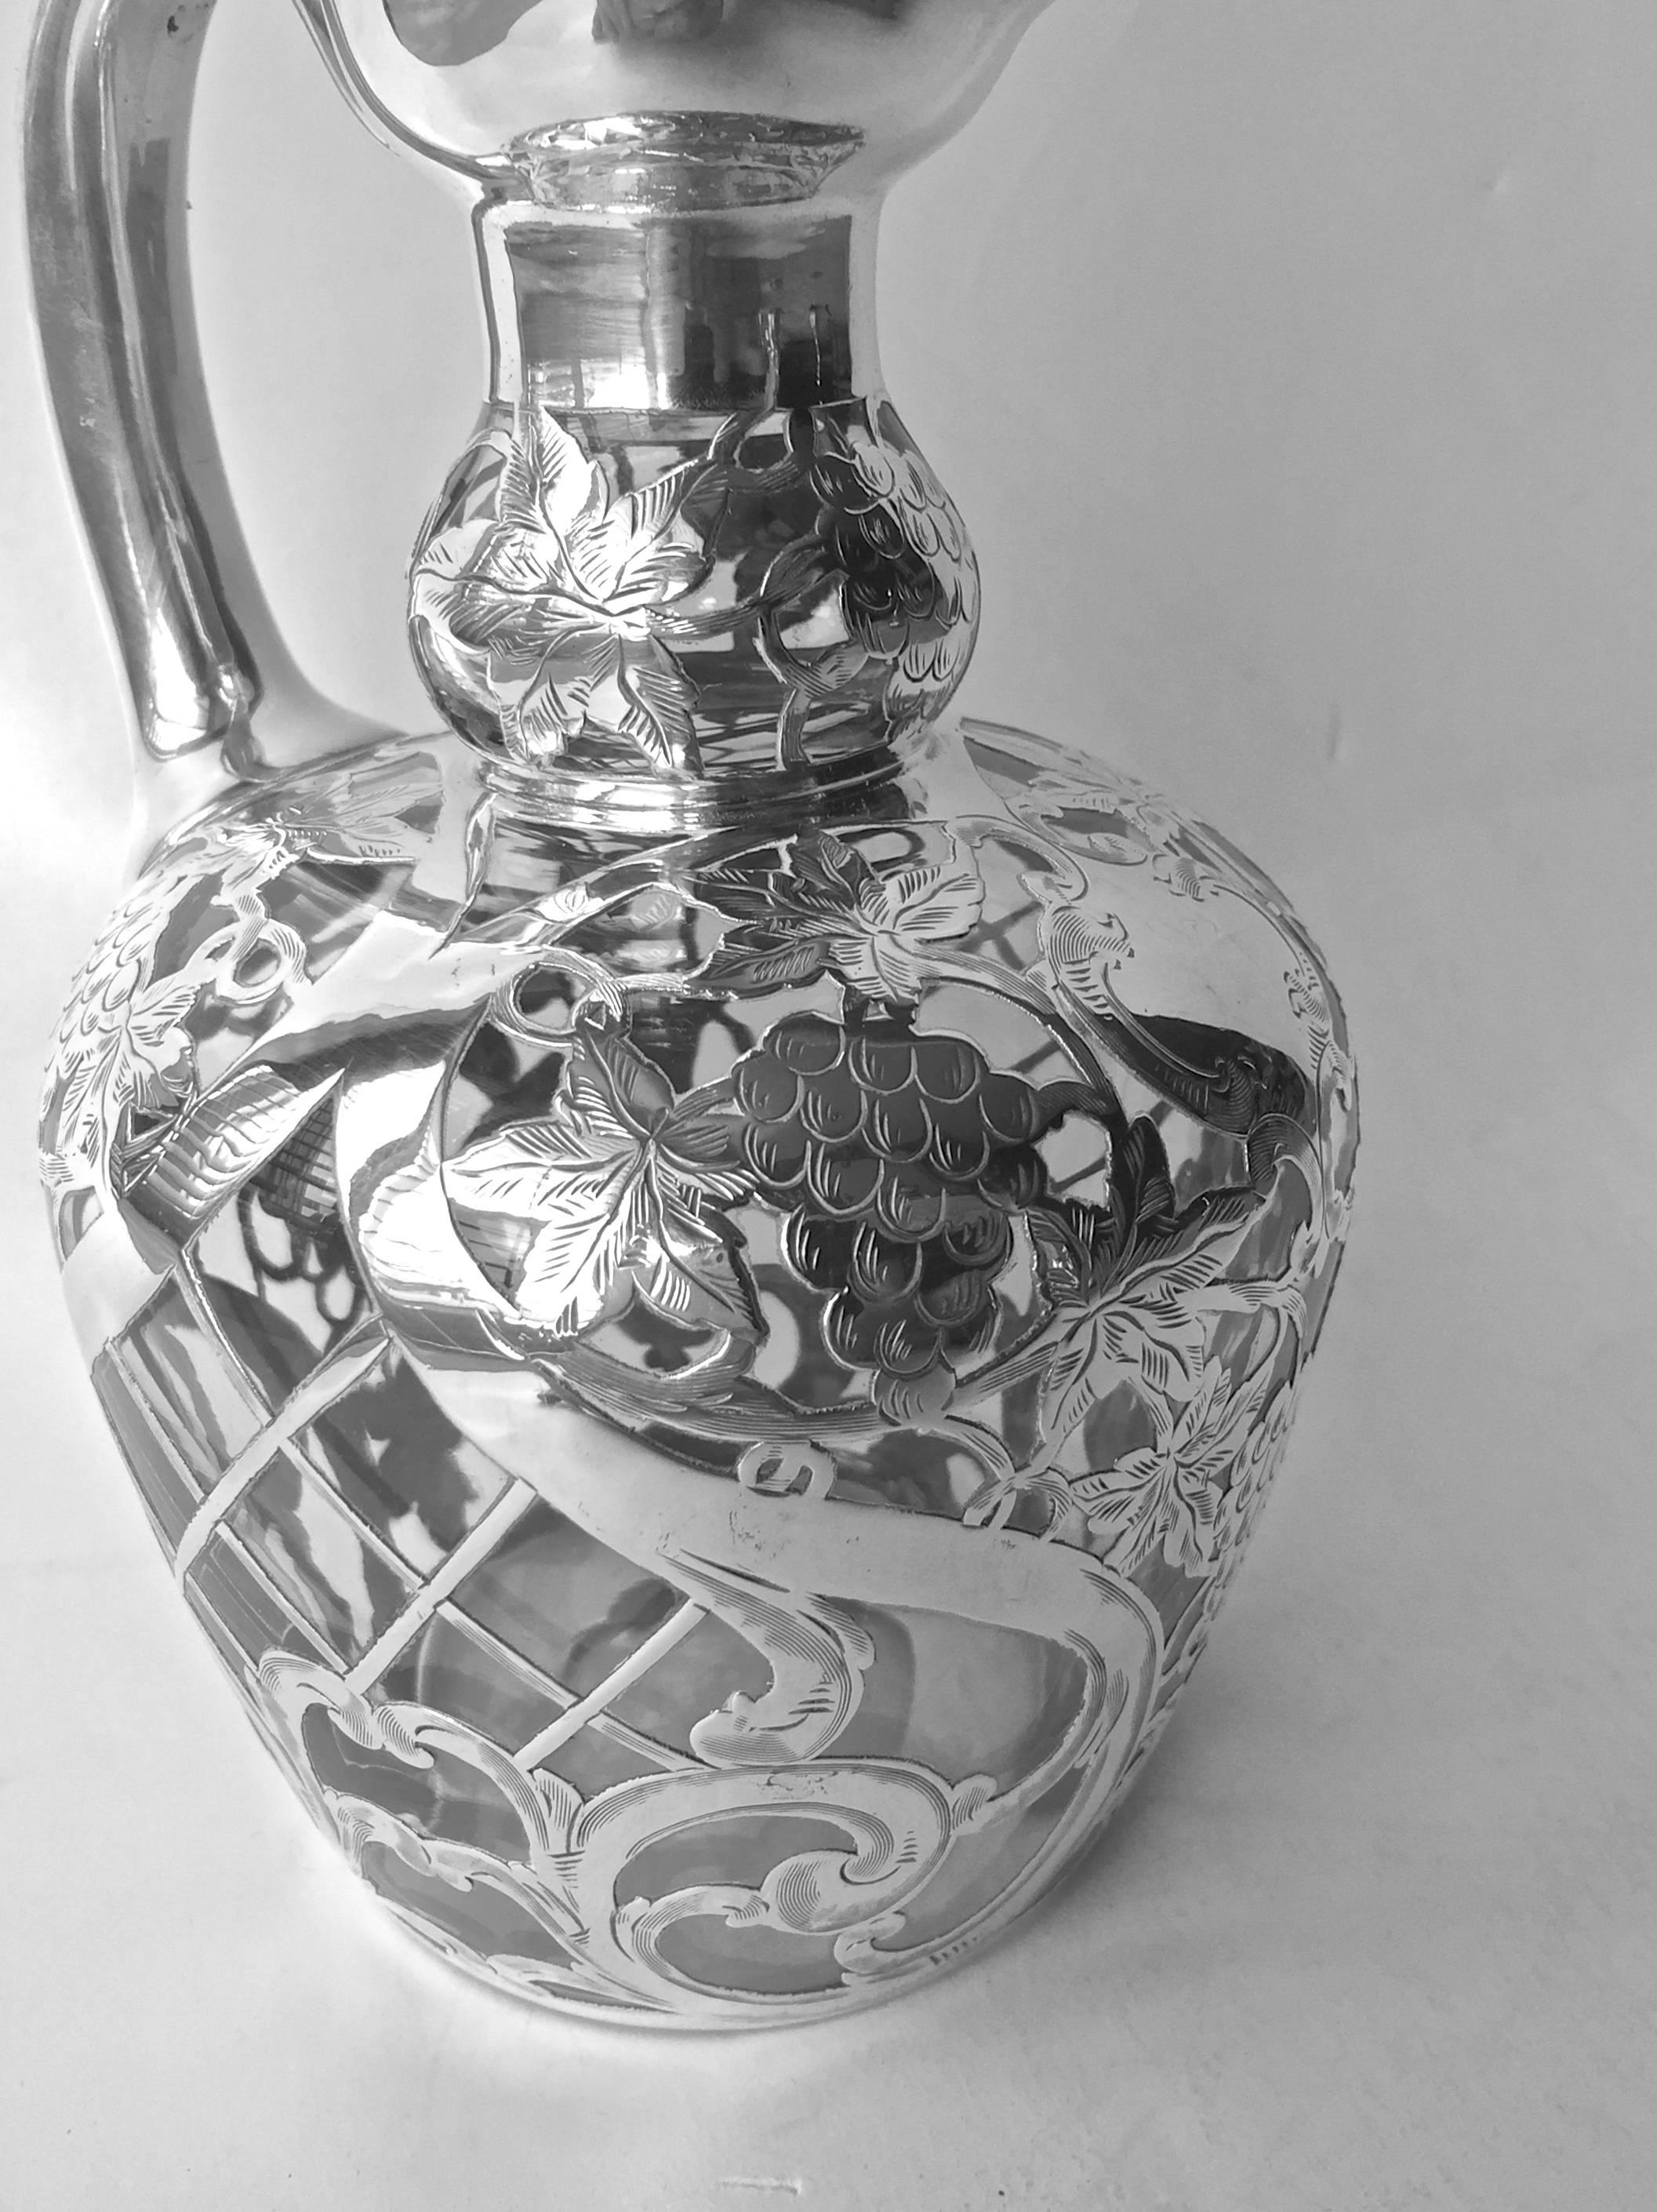 Antique Steuben Art Nouveau Sterling Silver Overlay Decanter, circa 1900 In Excellent Condition For Sale In Redding, CA